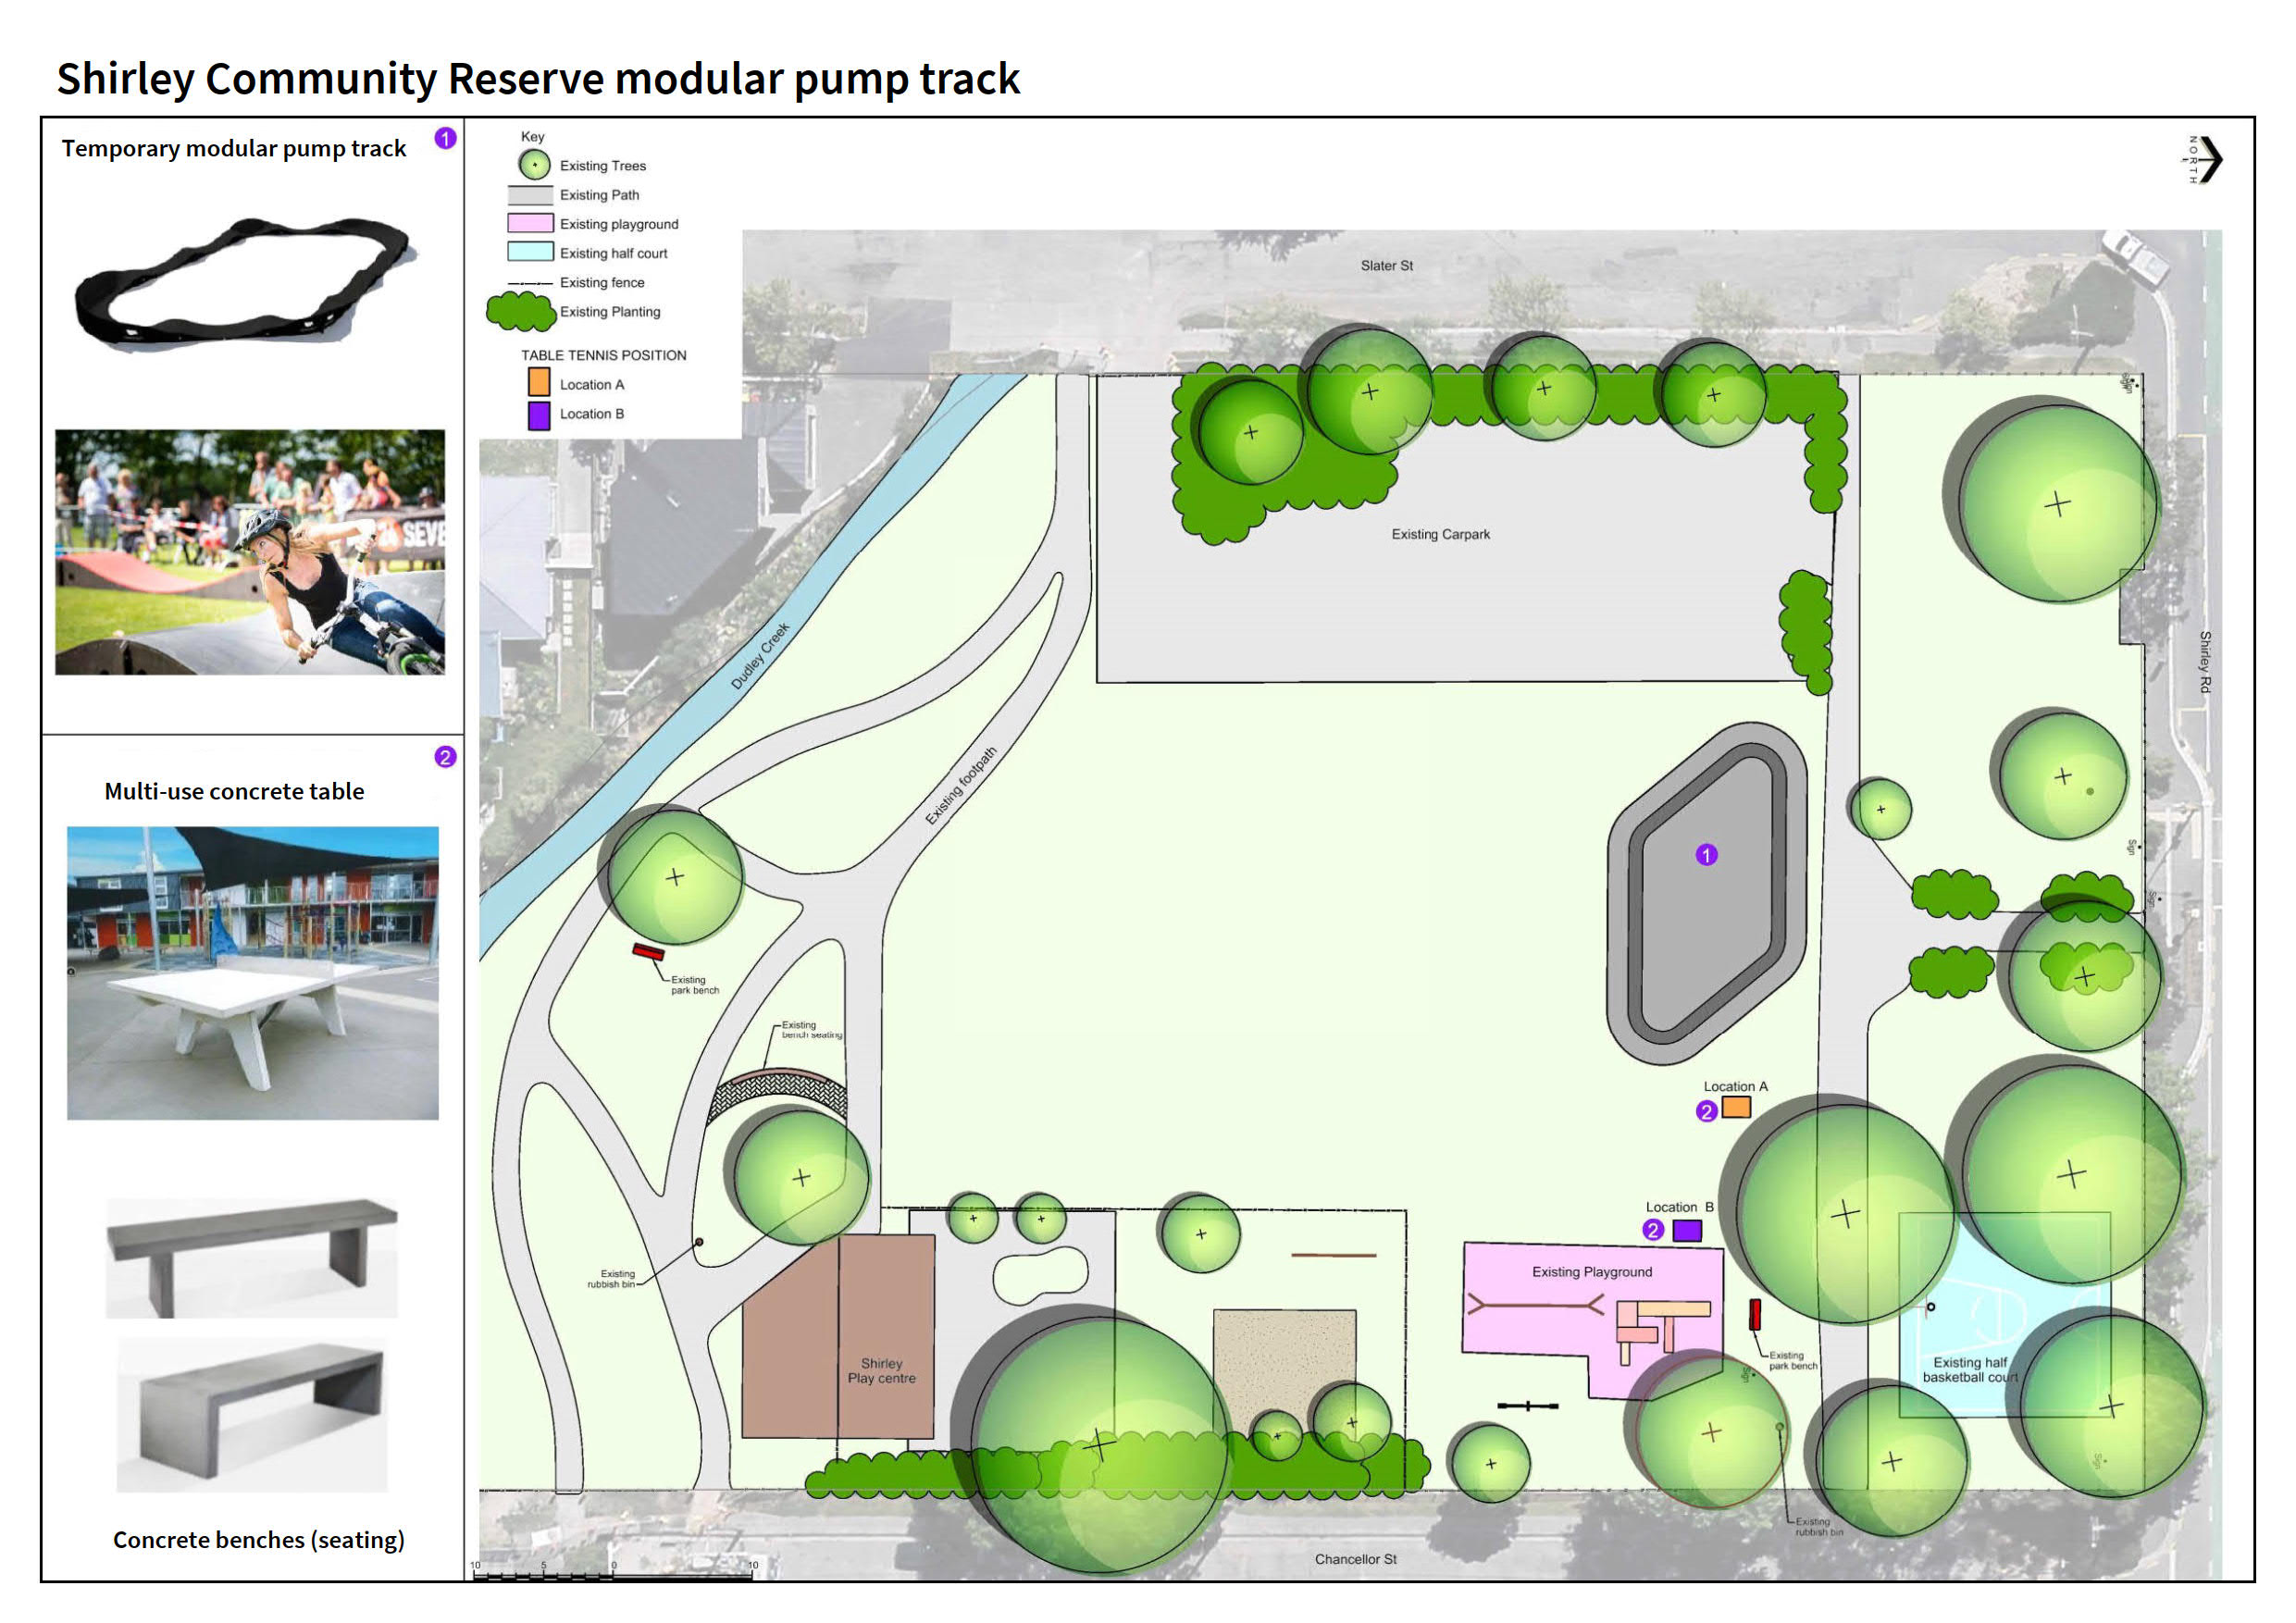 Shirley Community Reserve temporary pump track plans